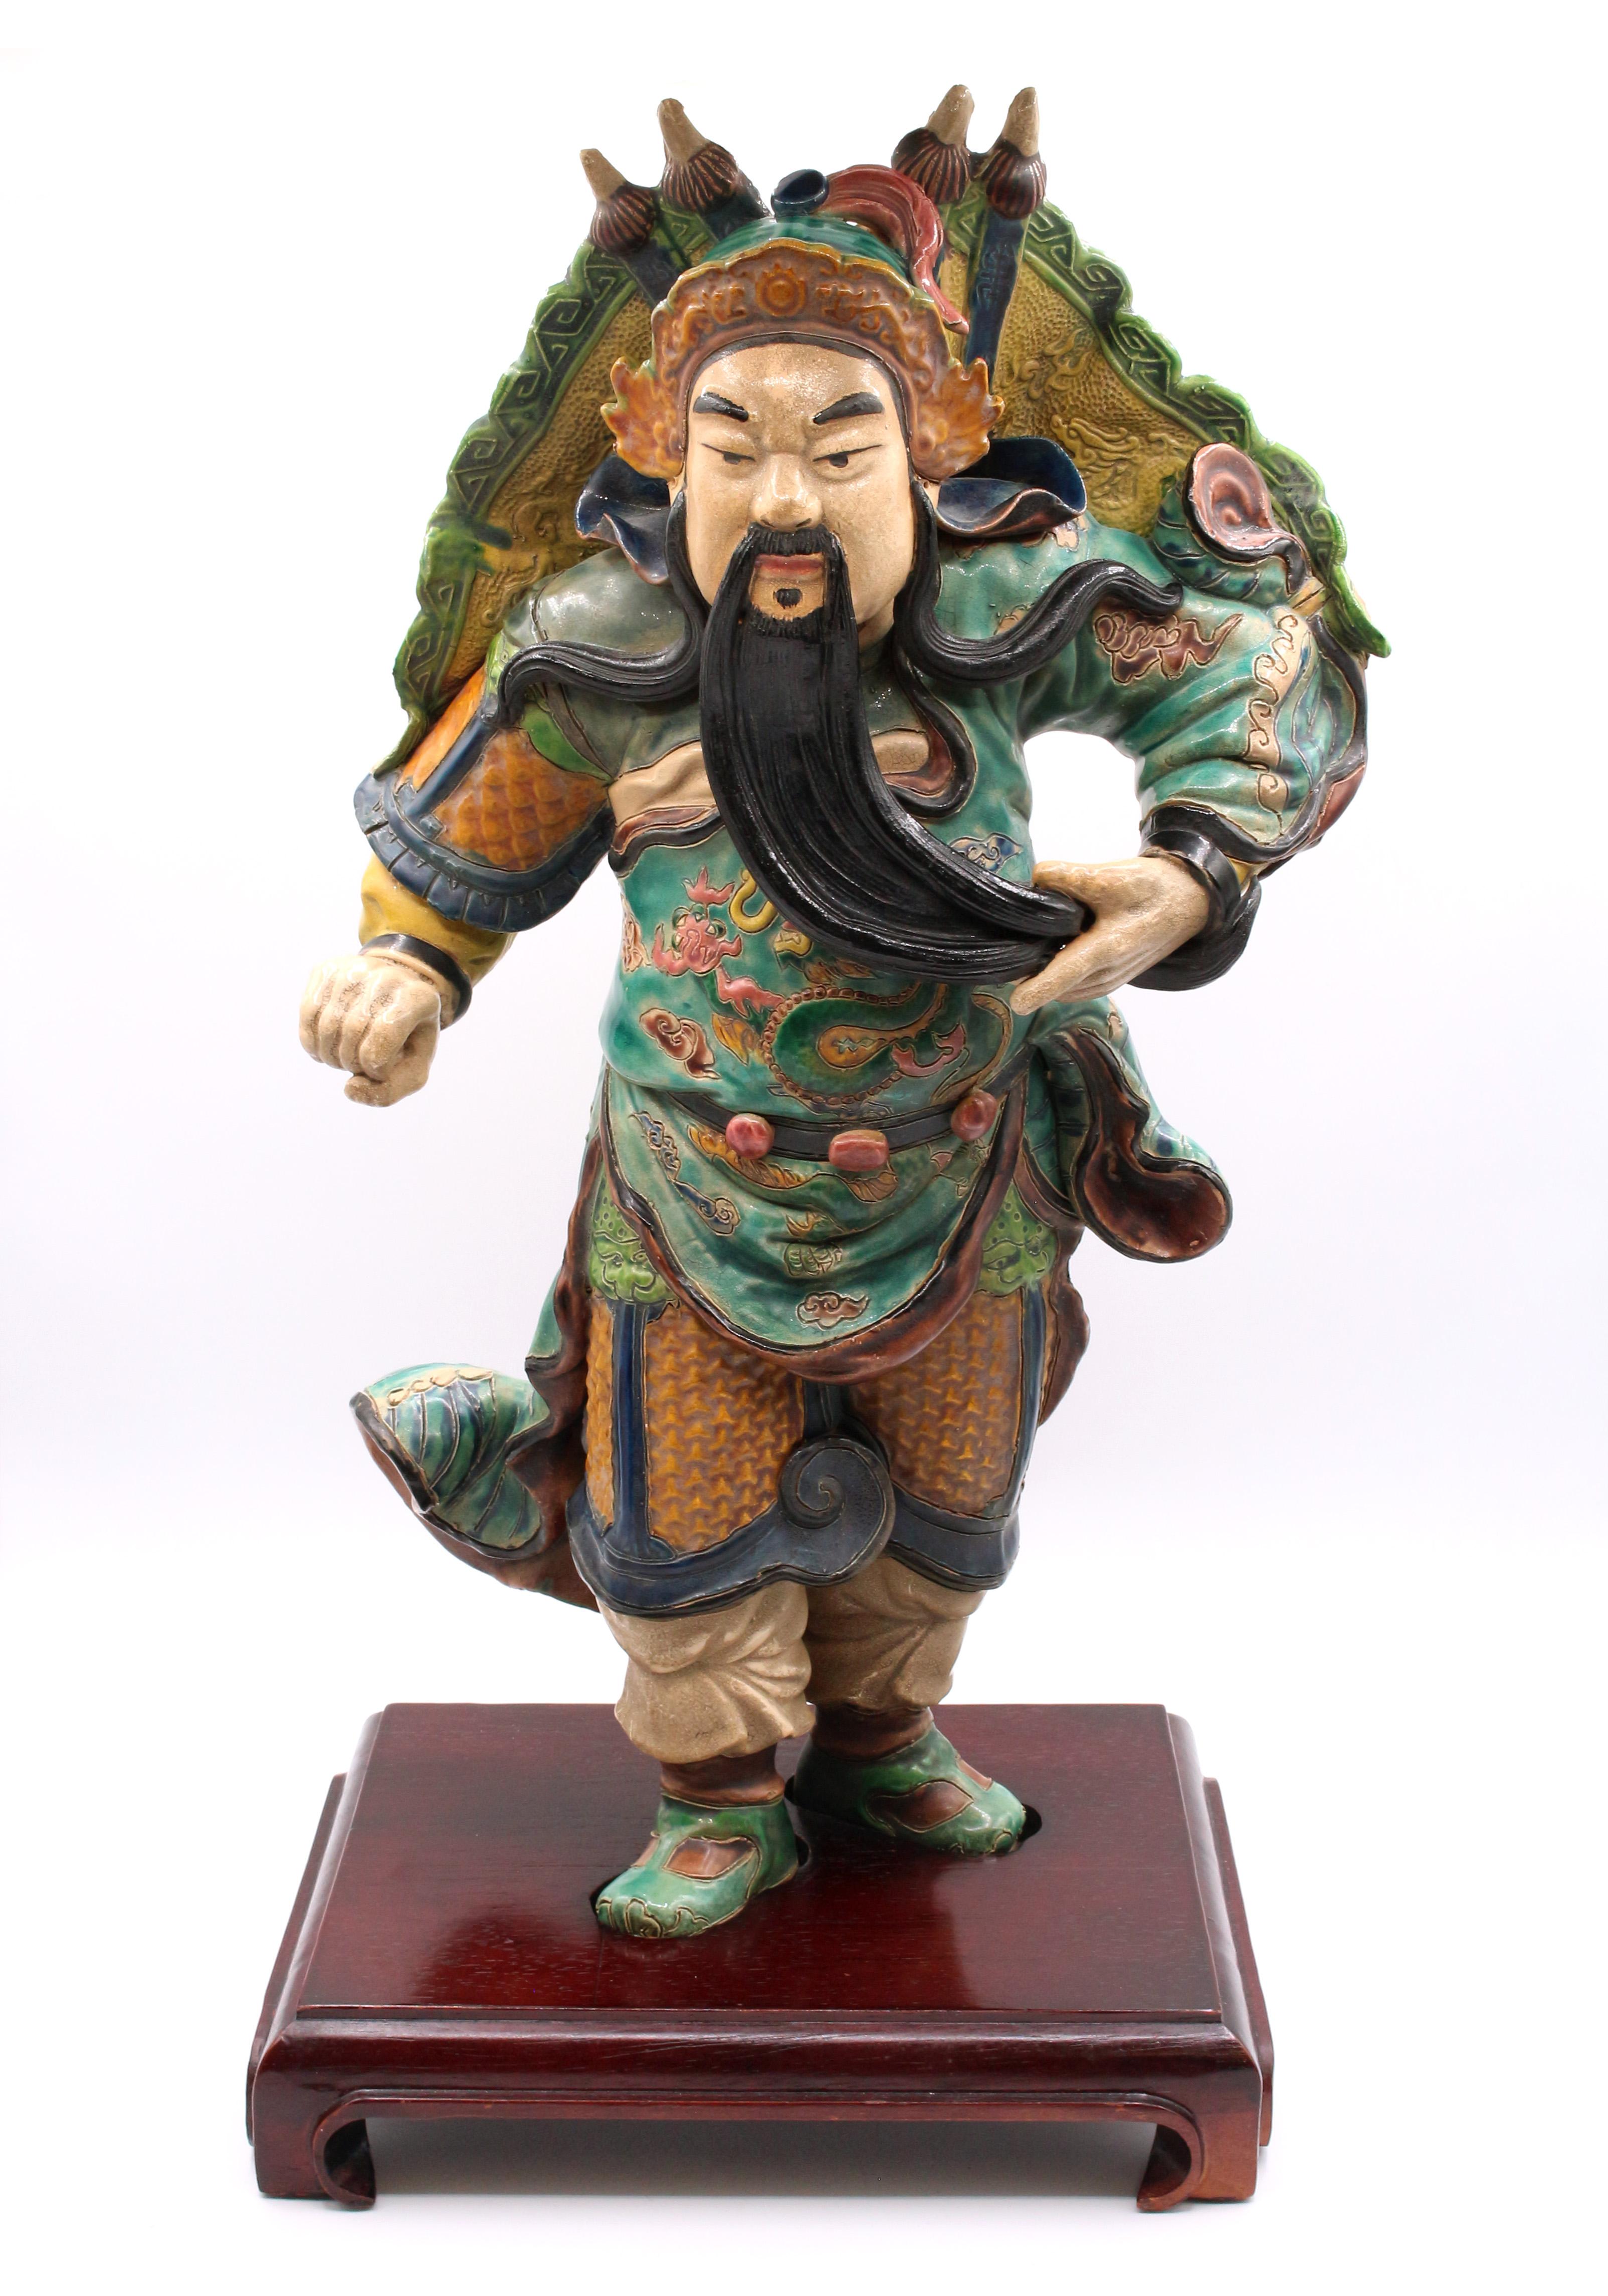 Late 19th century roof tile figure, Chinese. Polychrome glazed stoneware pottery. A man with long flowing beard and flowing robe decorated with dragons in a dramatic stance supported by a custom stand. Some normal wear & original back hole filled